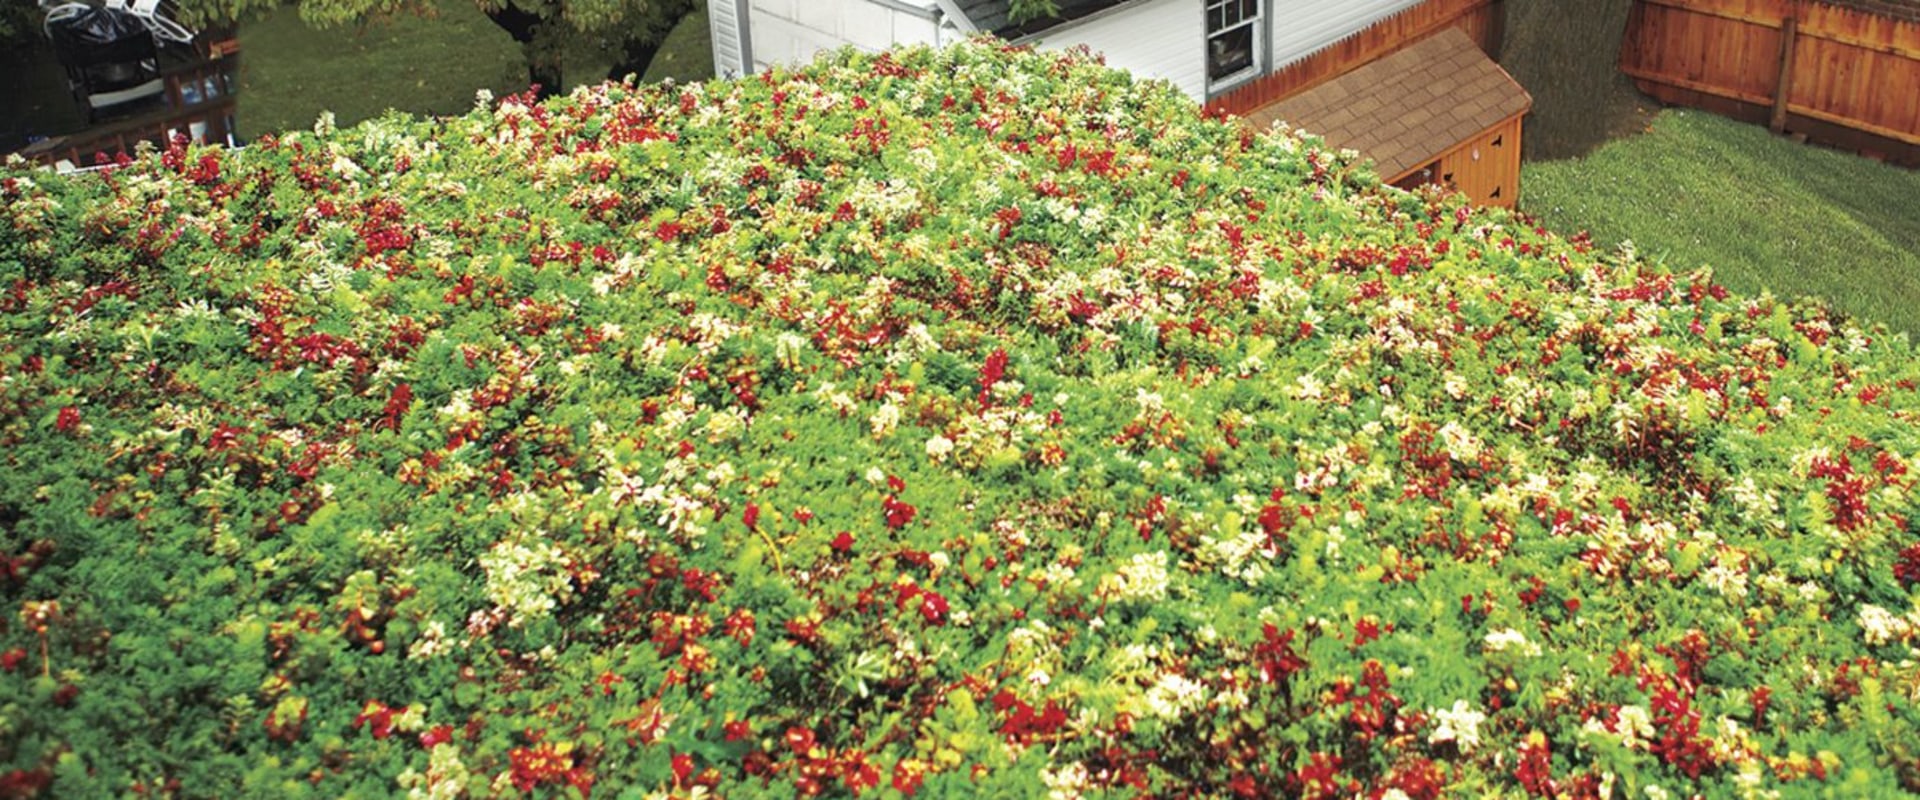 Can you put a green roof on an existing roof?